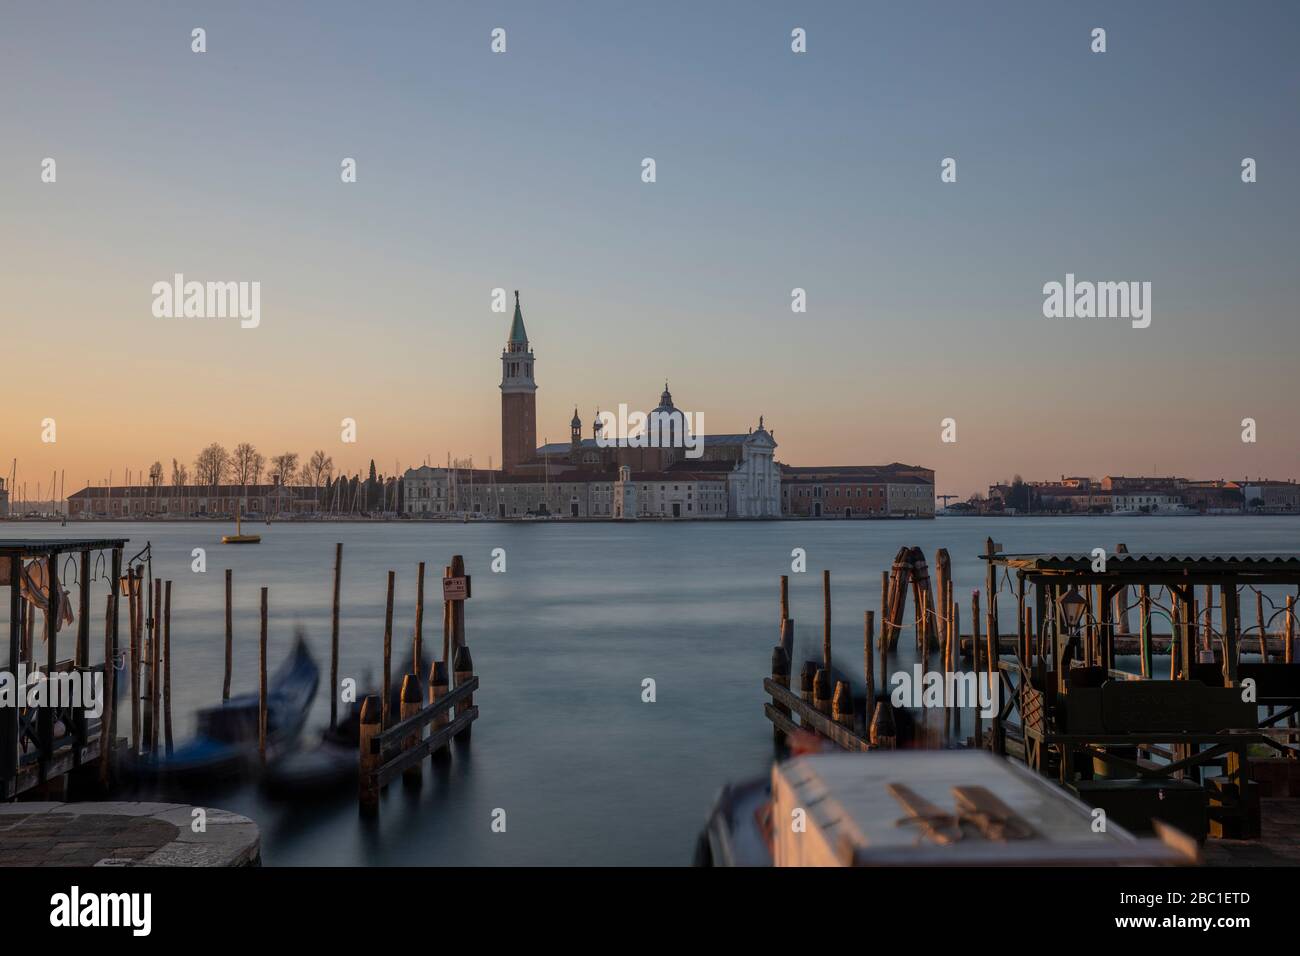 - dusk Alamy photography hi-res at stock images maggiore San and giorgio